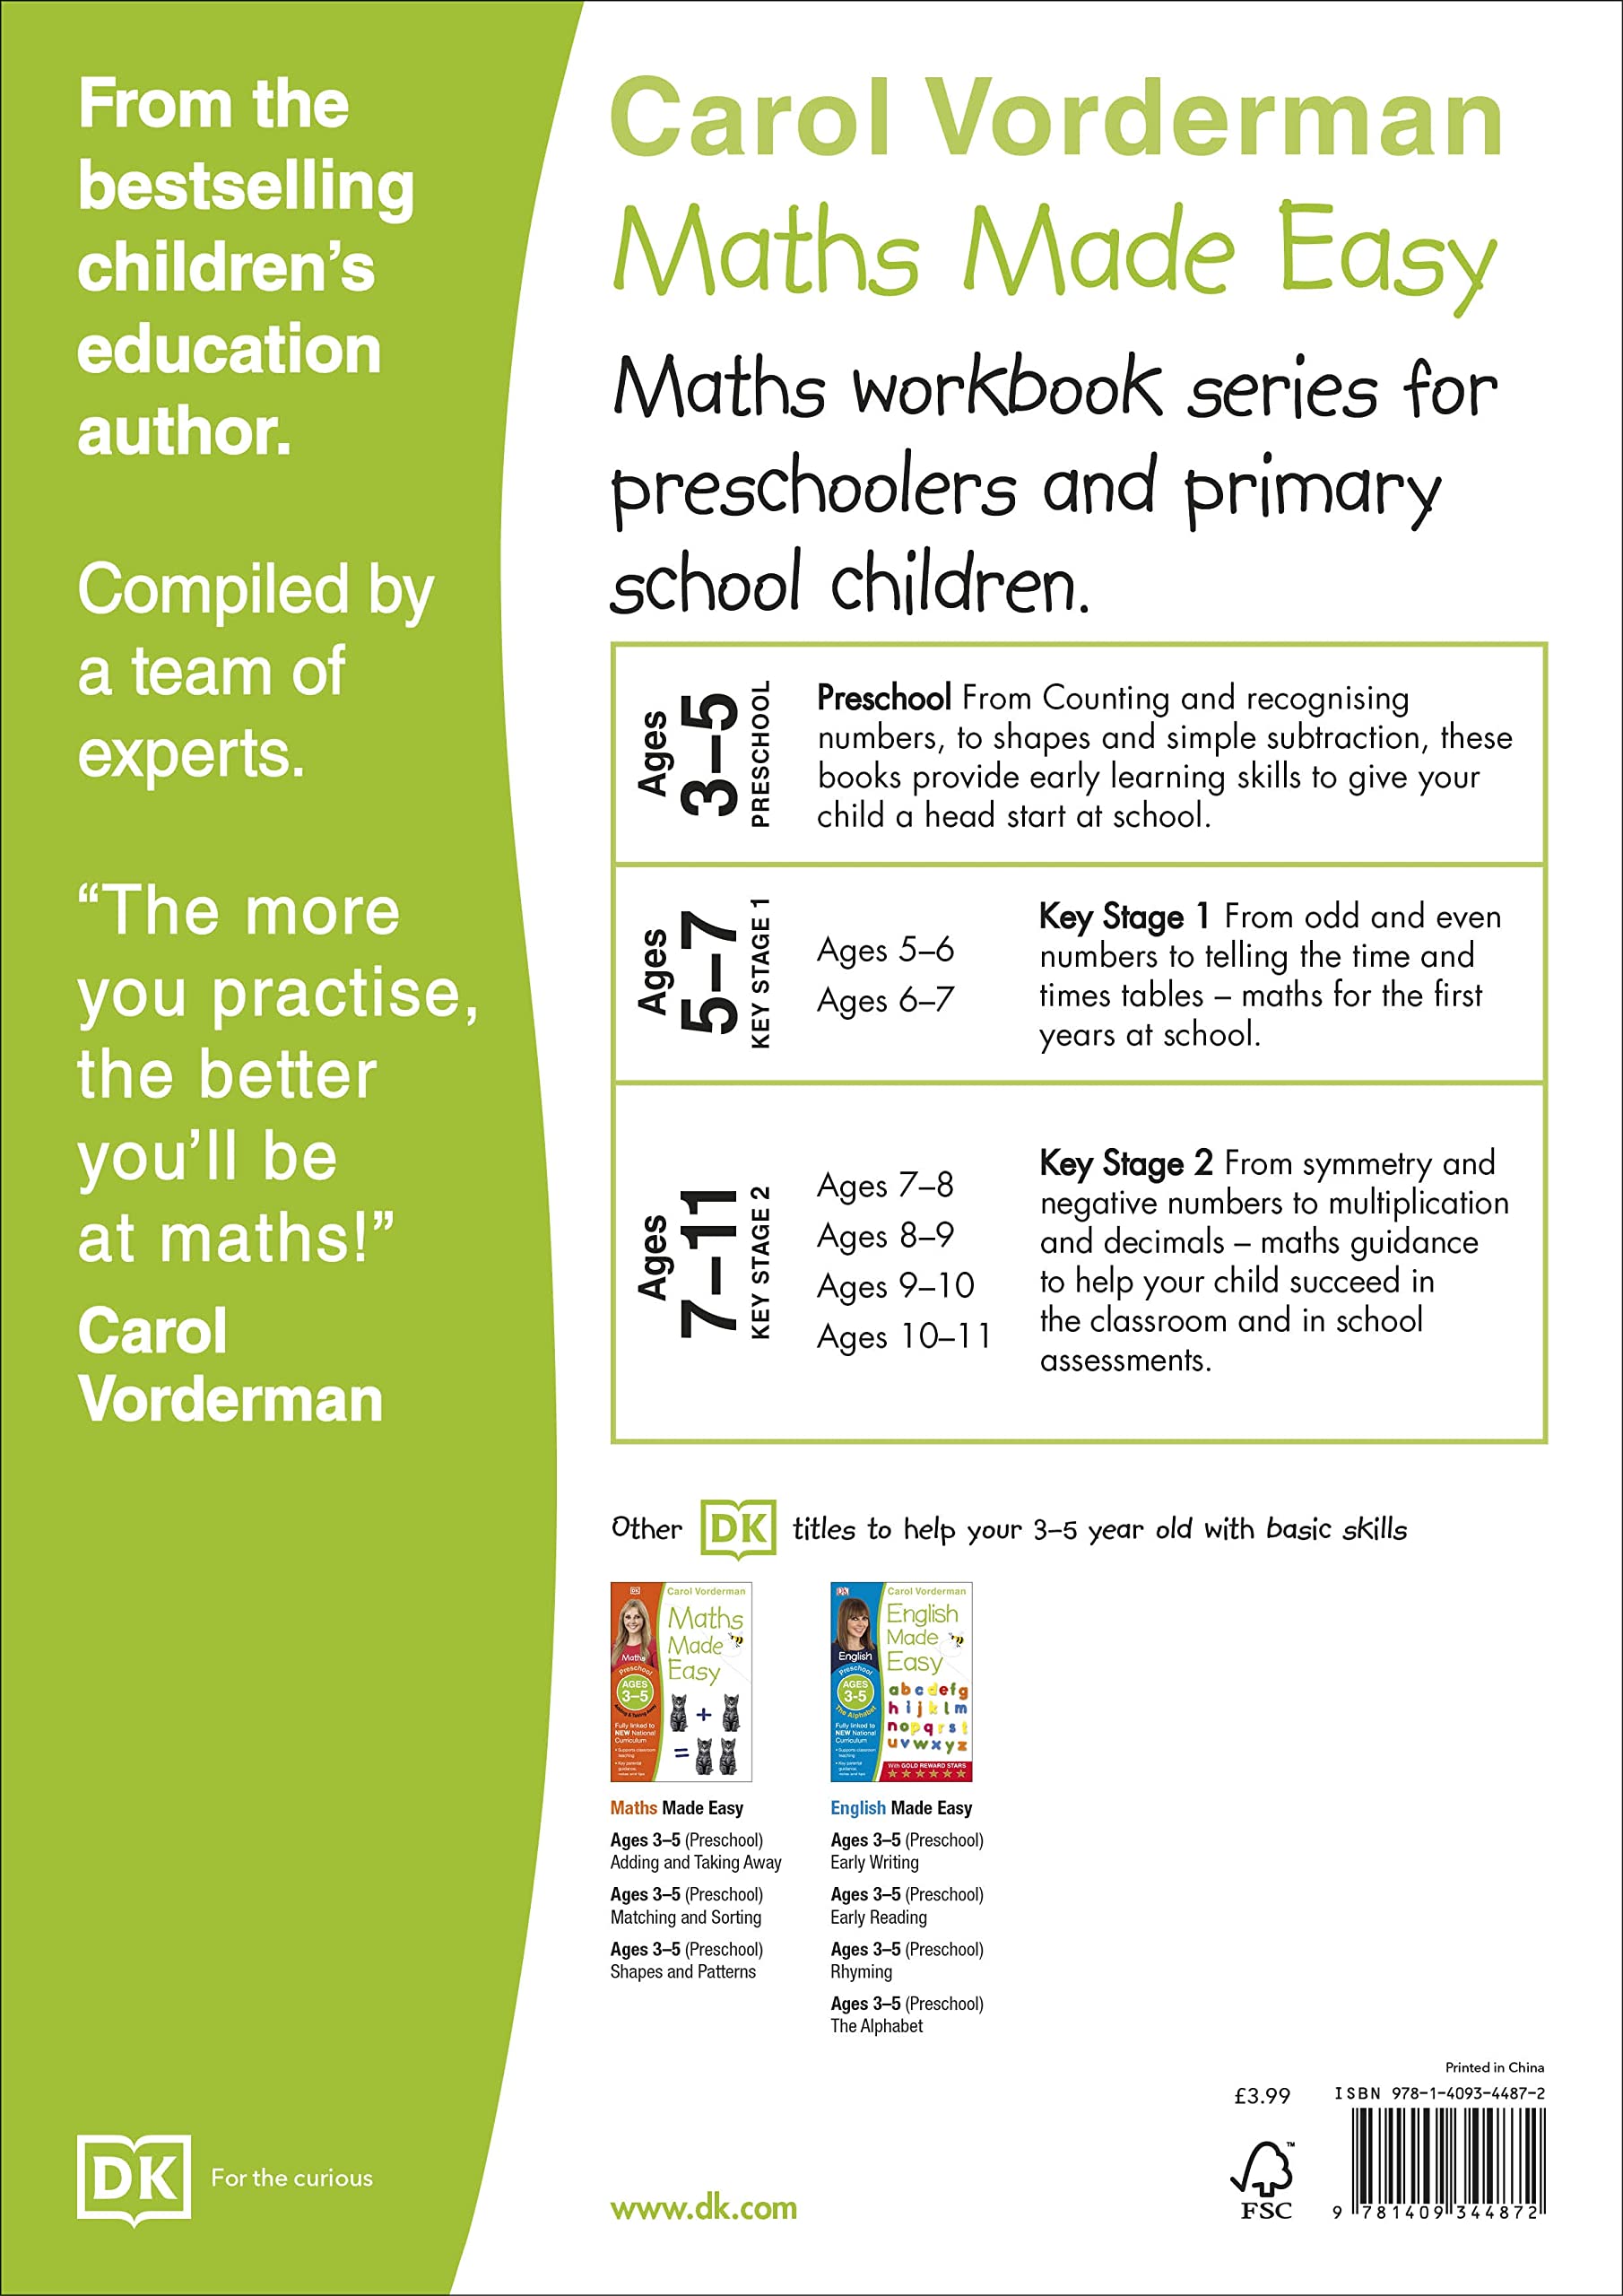 Maths Made Easy: Numbers, Ages 3-5 (Preschool)